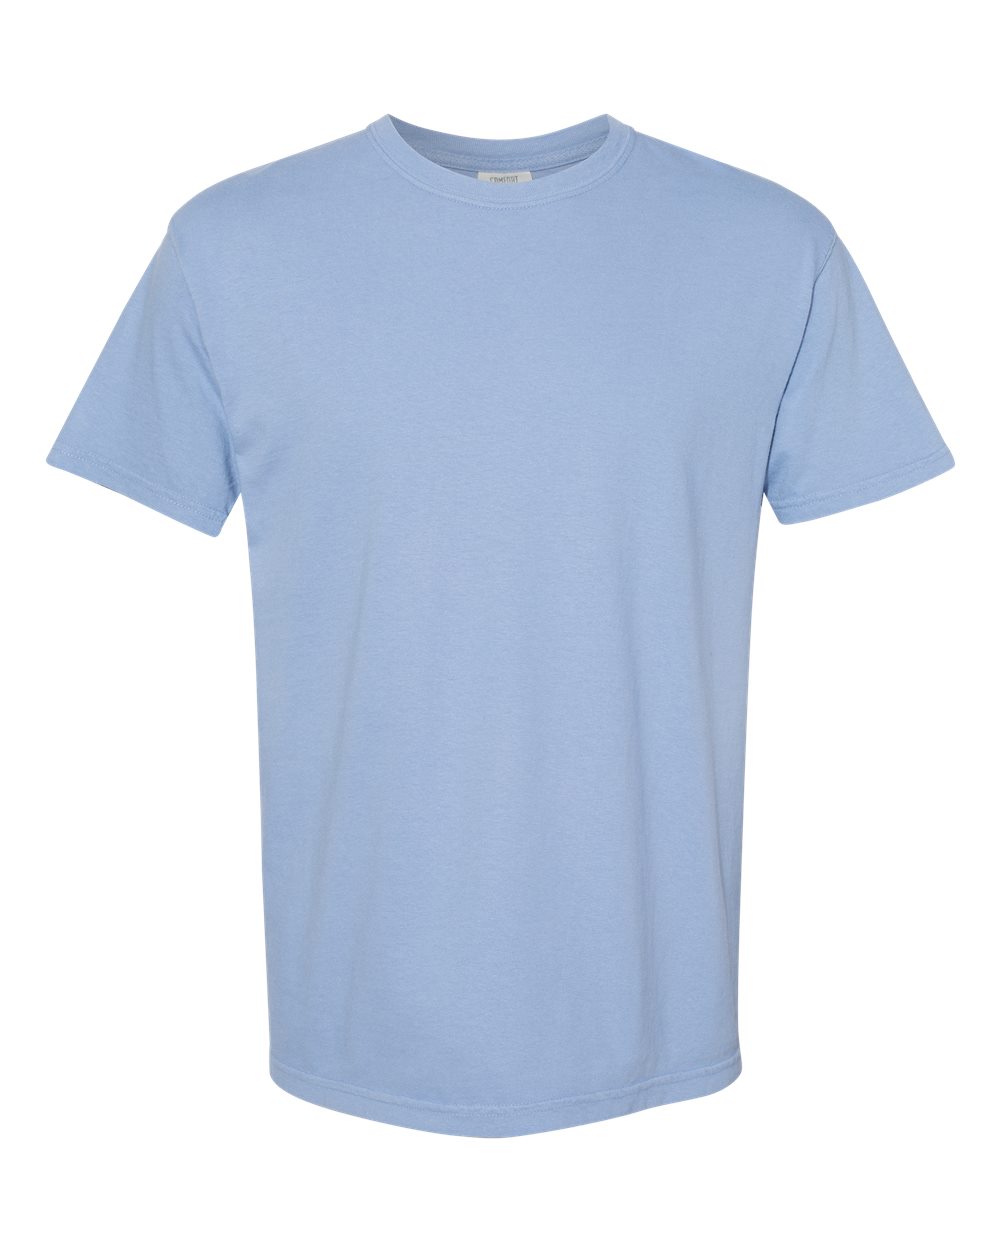 Comfort Colors Garment-Dyed Tee (1717) in Washed Denim